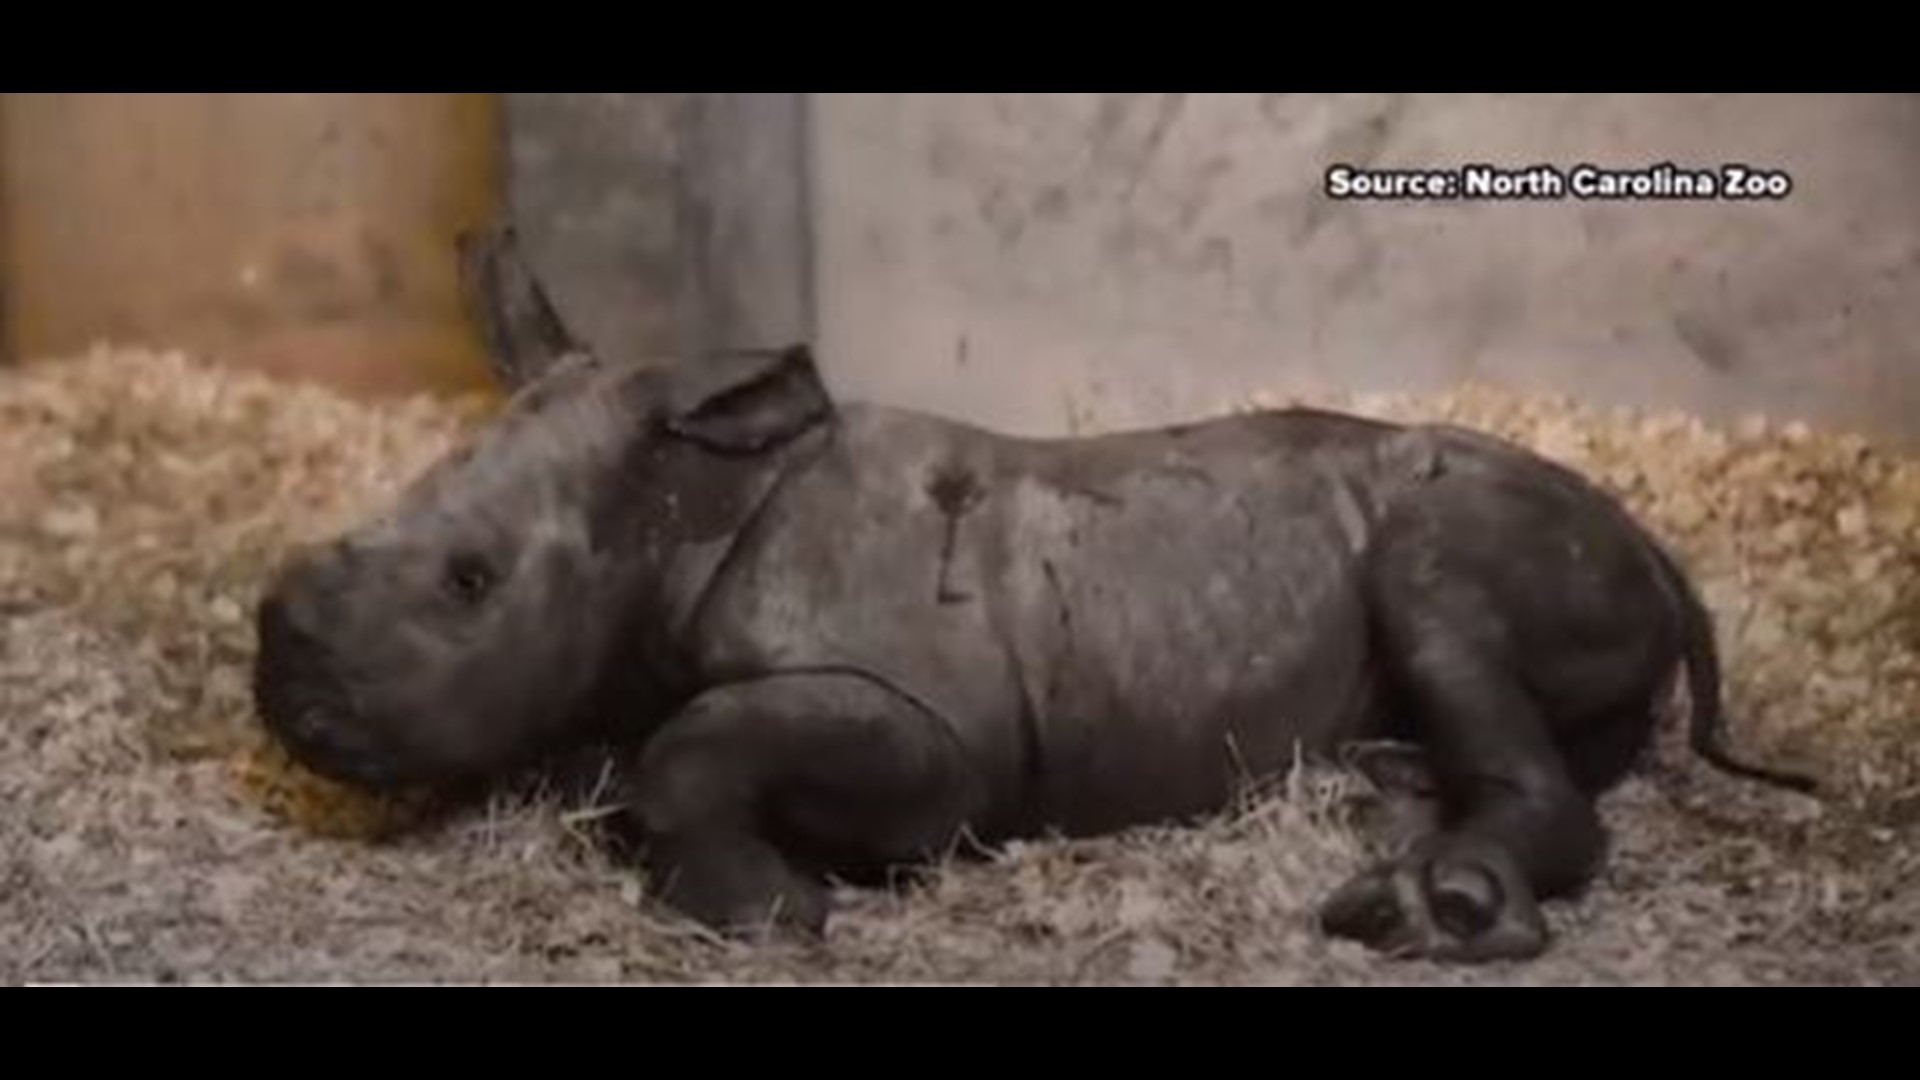 The North Carolina Zoo announced a new baby rhino, Thursday morning. The zoo said this makes the third birth of a southern white rhino in just under two years.